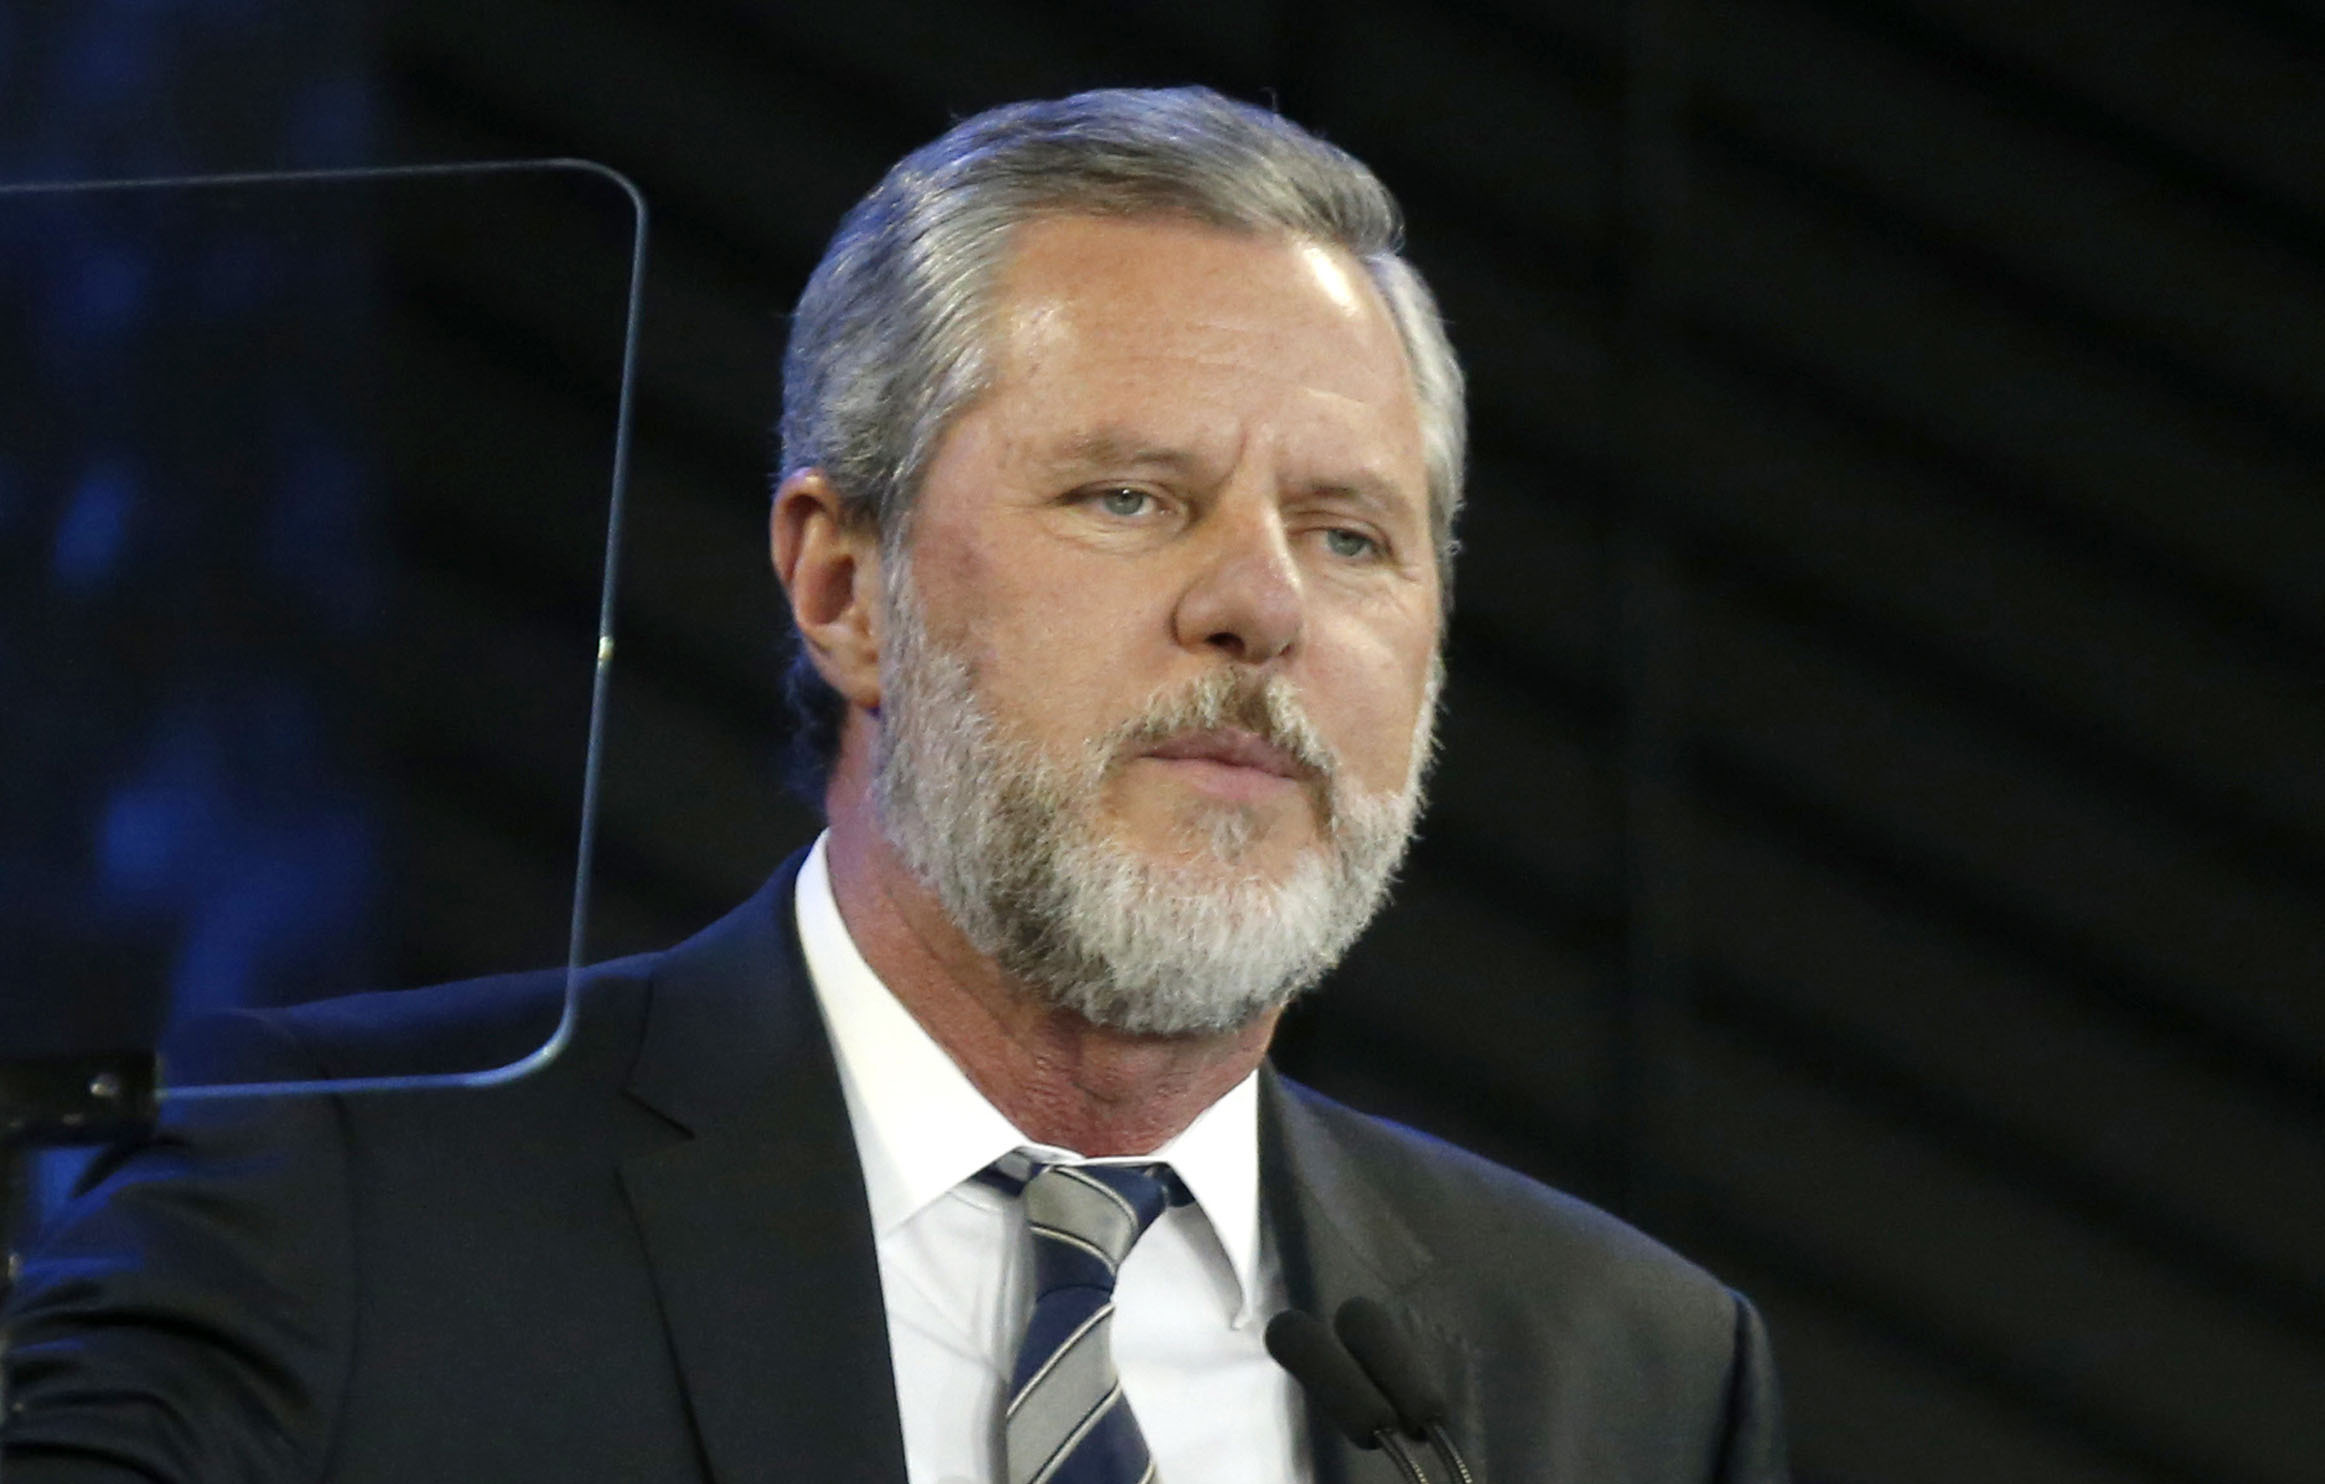 PHOTO: In this Nov. 28, 2018, file photo, Liberty University President Jerry Falwell Jr. speaks before a convocation at the university in Lynchburg, Va.